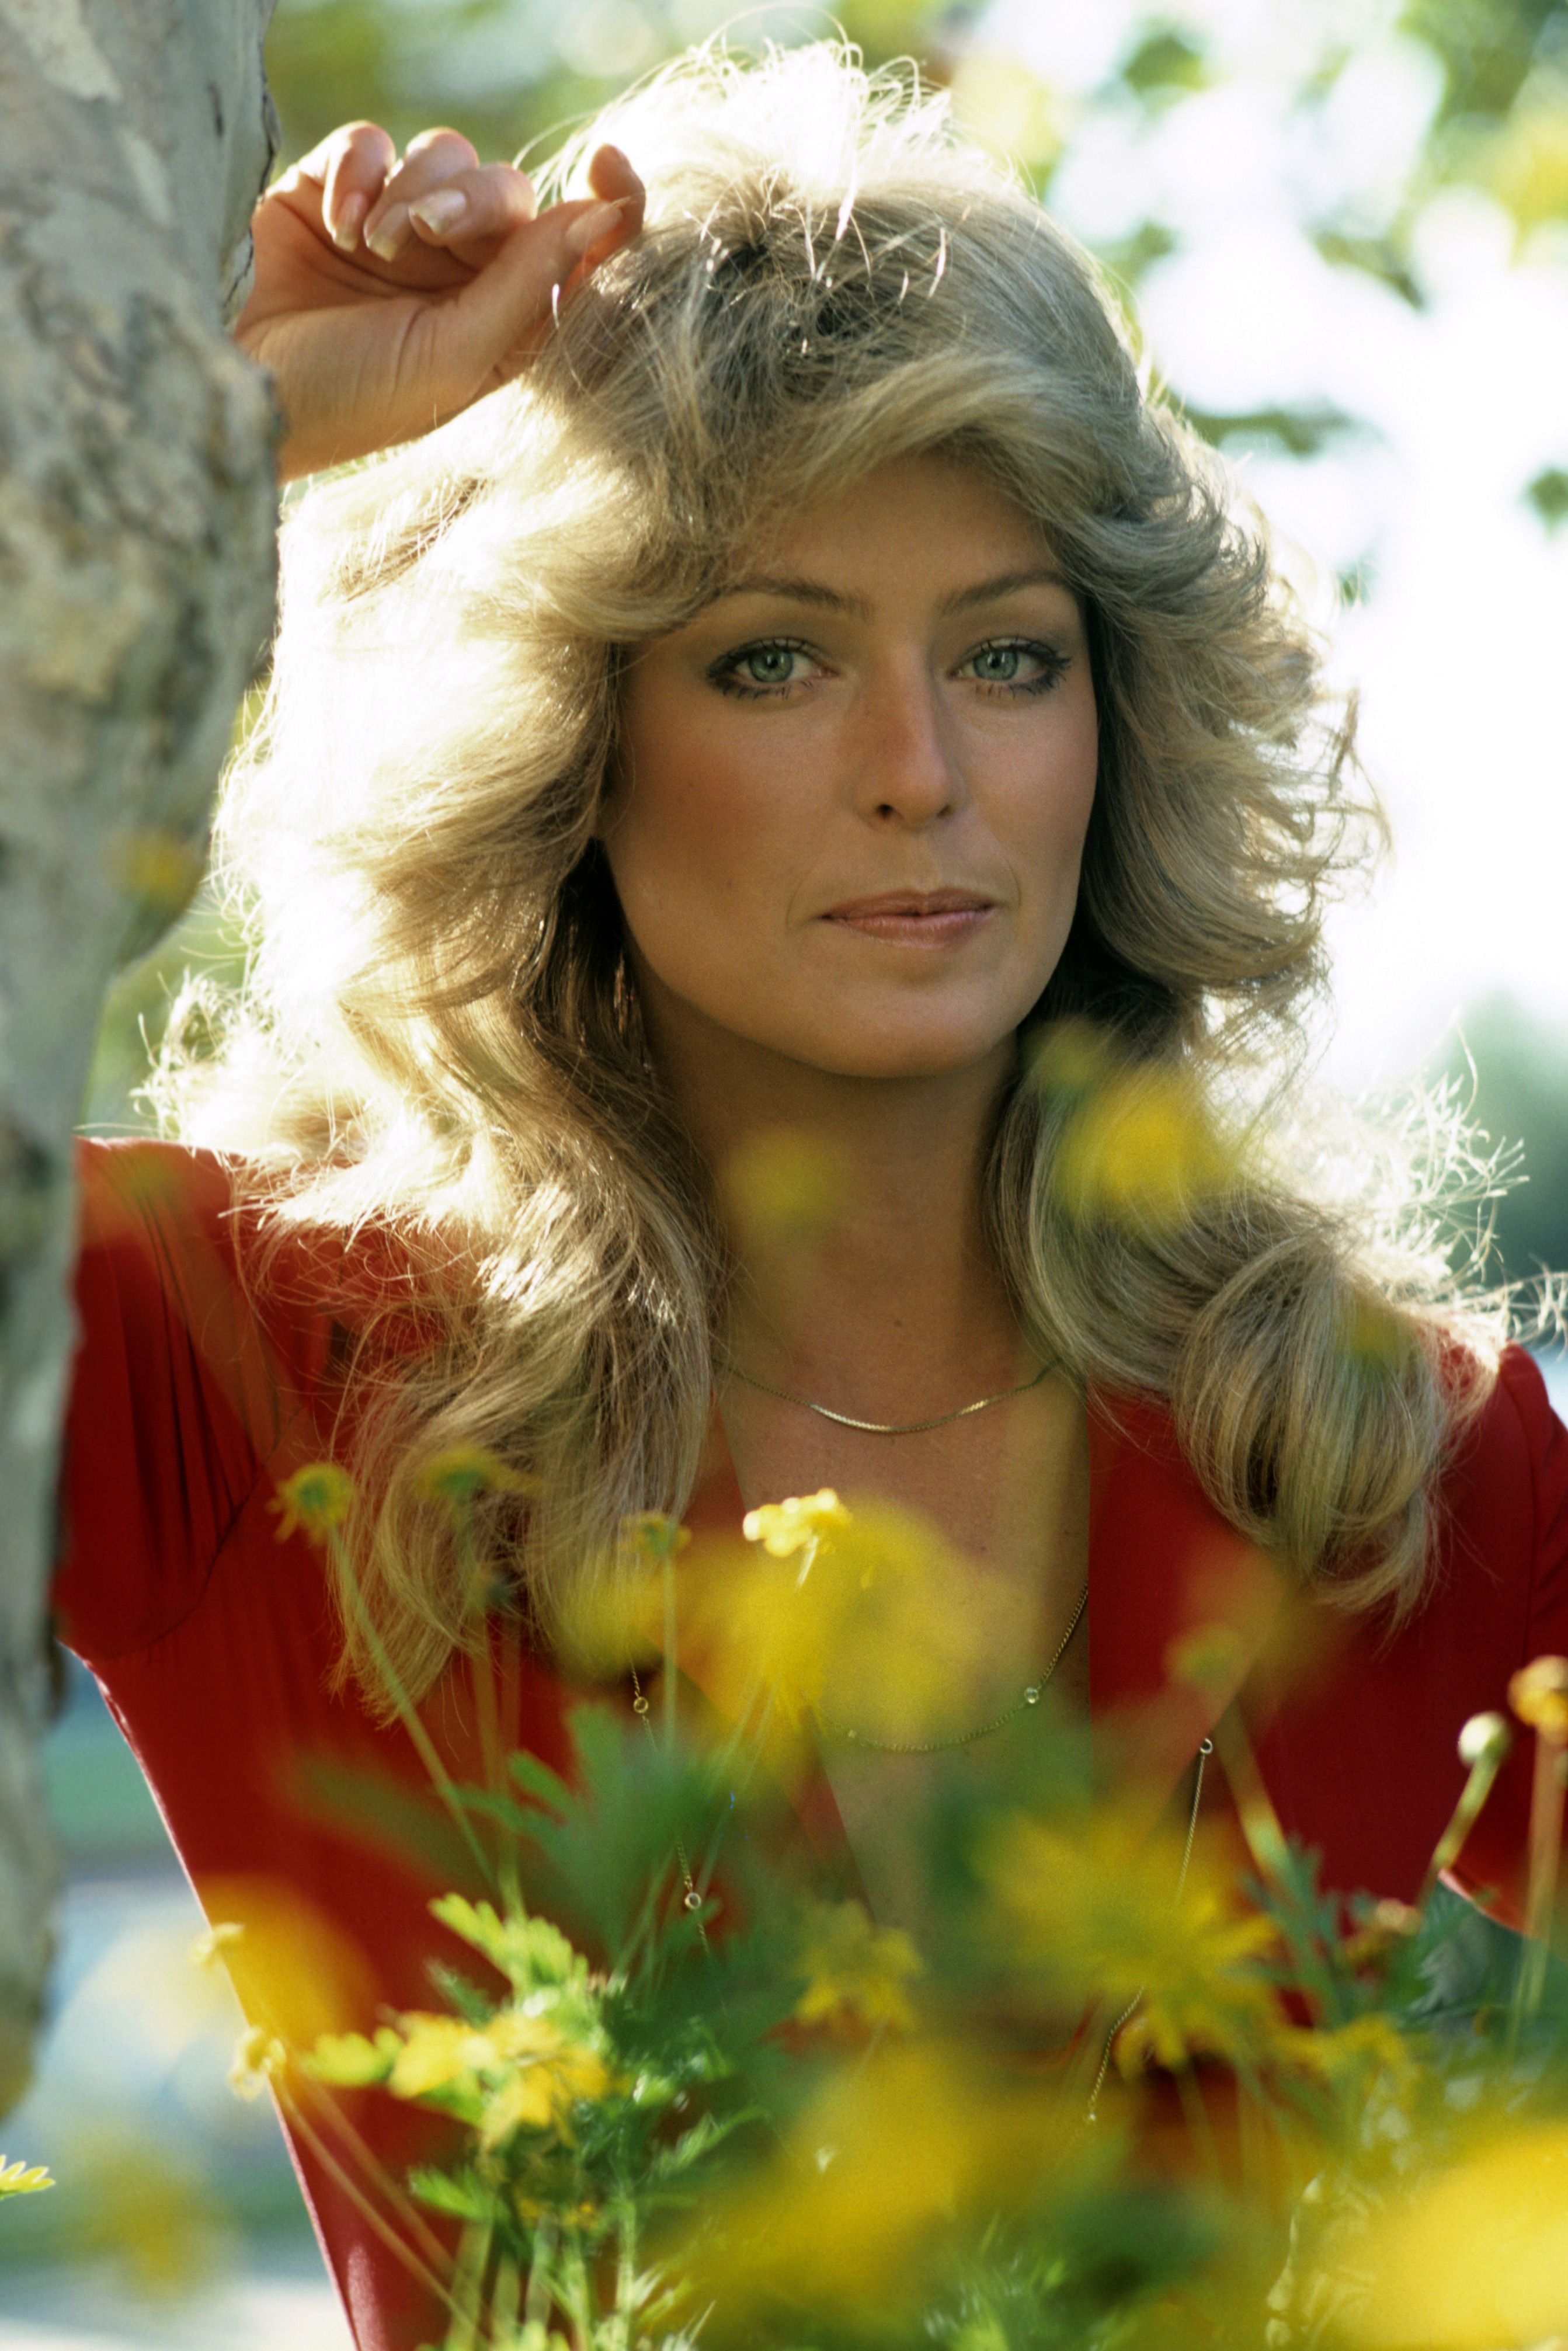 FARRAH FAWCETT YOUNG GLOSSY PICTURE 8x10 PHOTO 